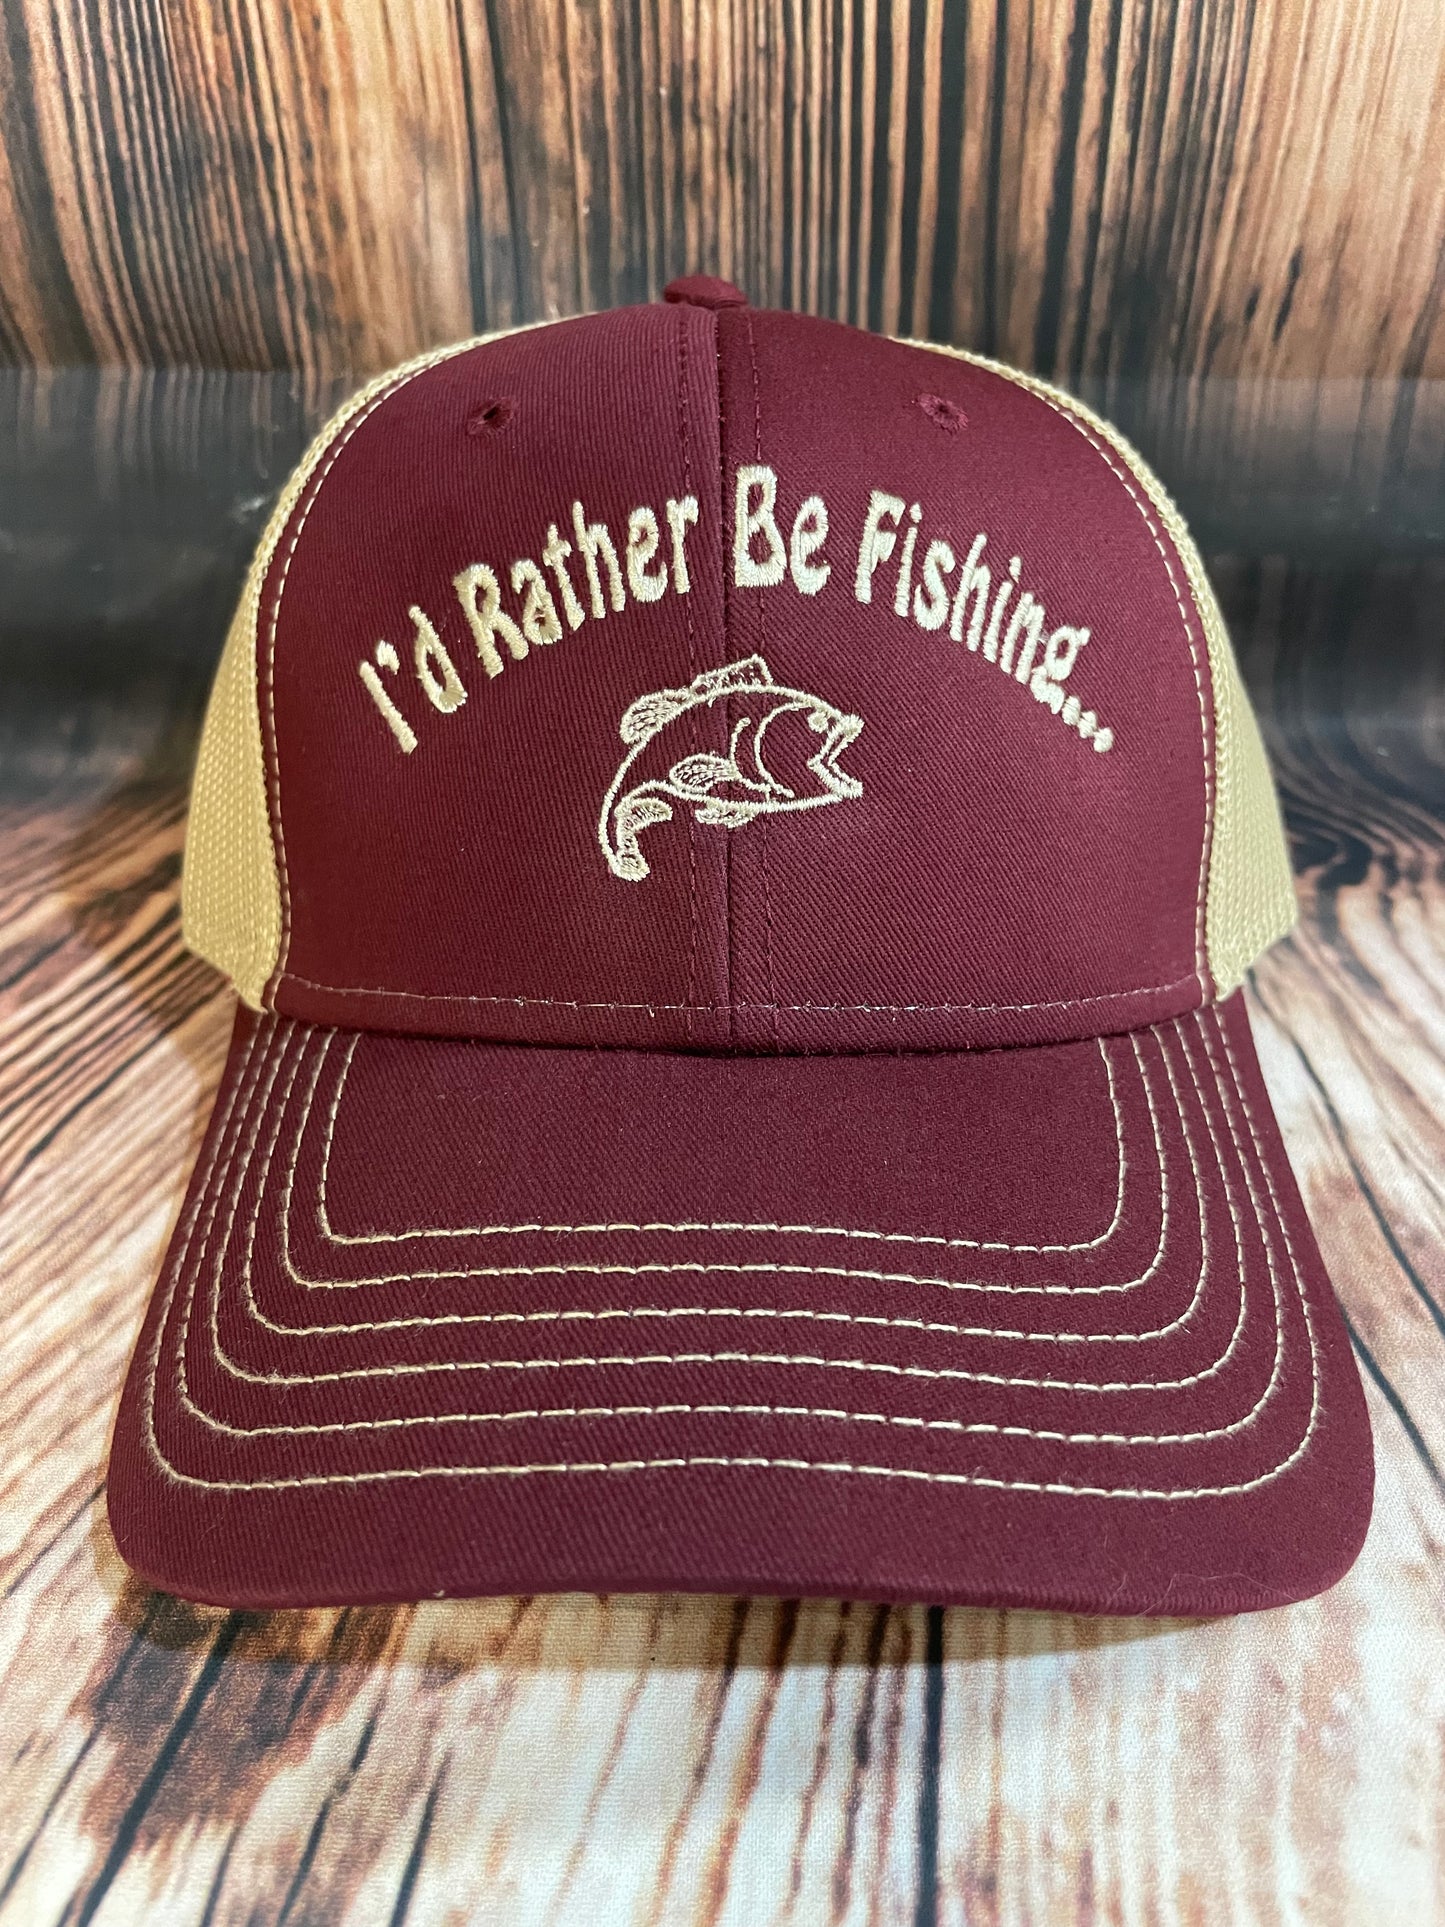 "I'd Rather Be Fishing" Trucker Hat